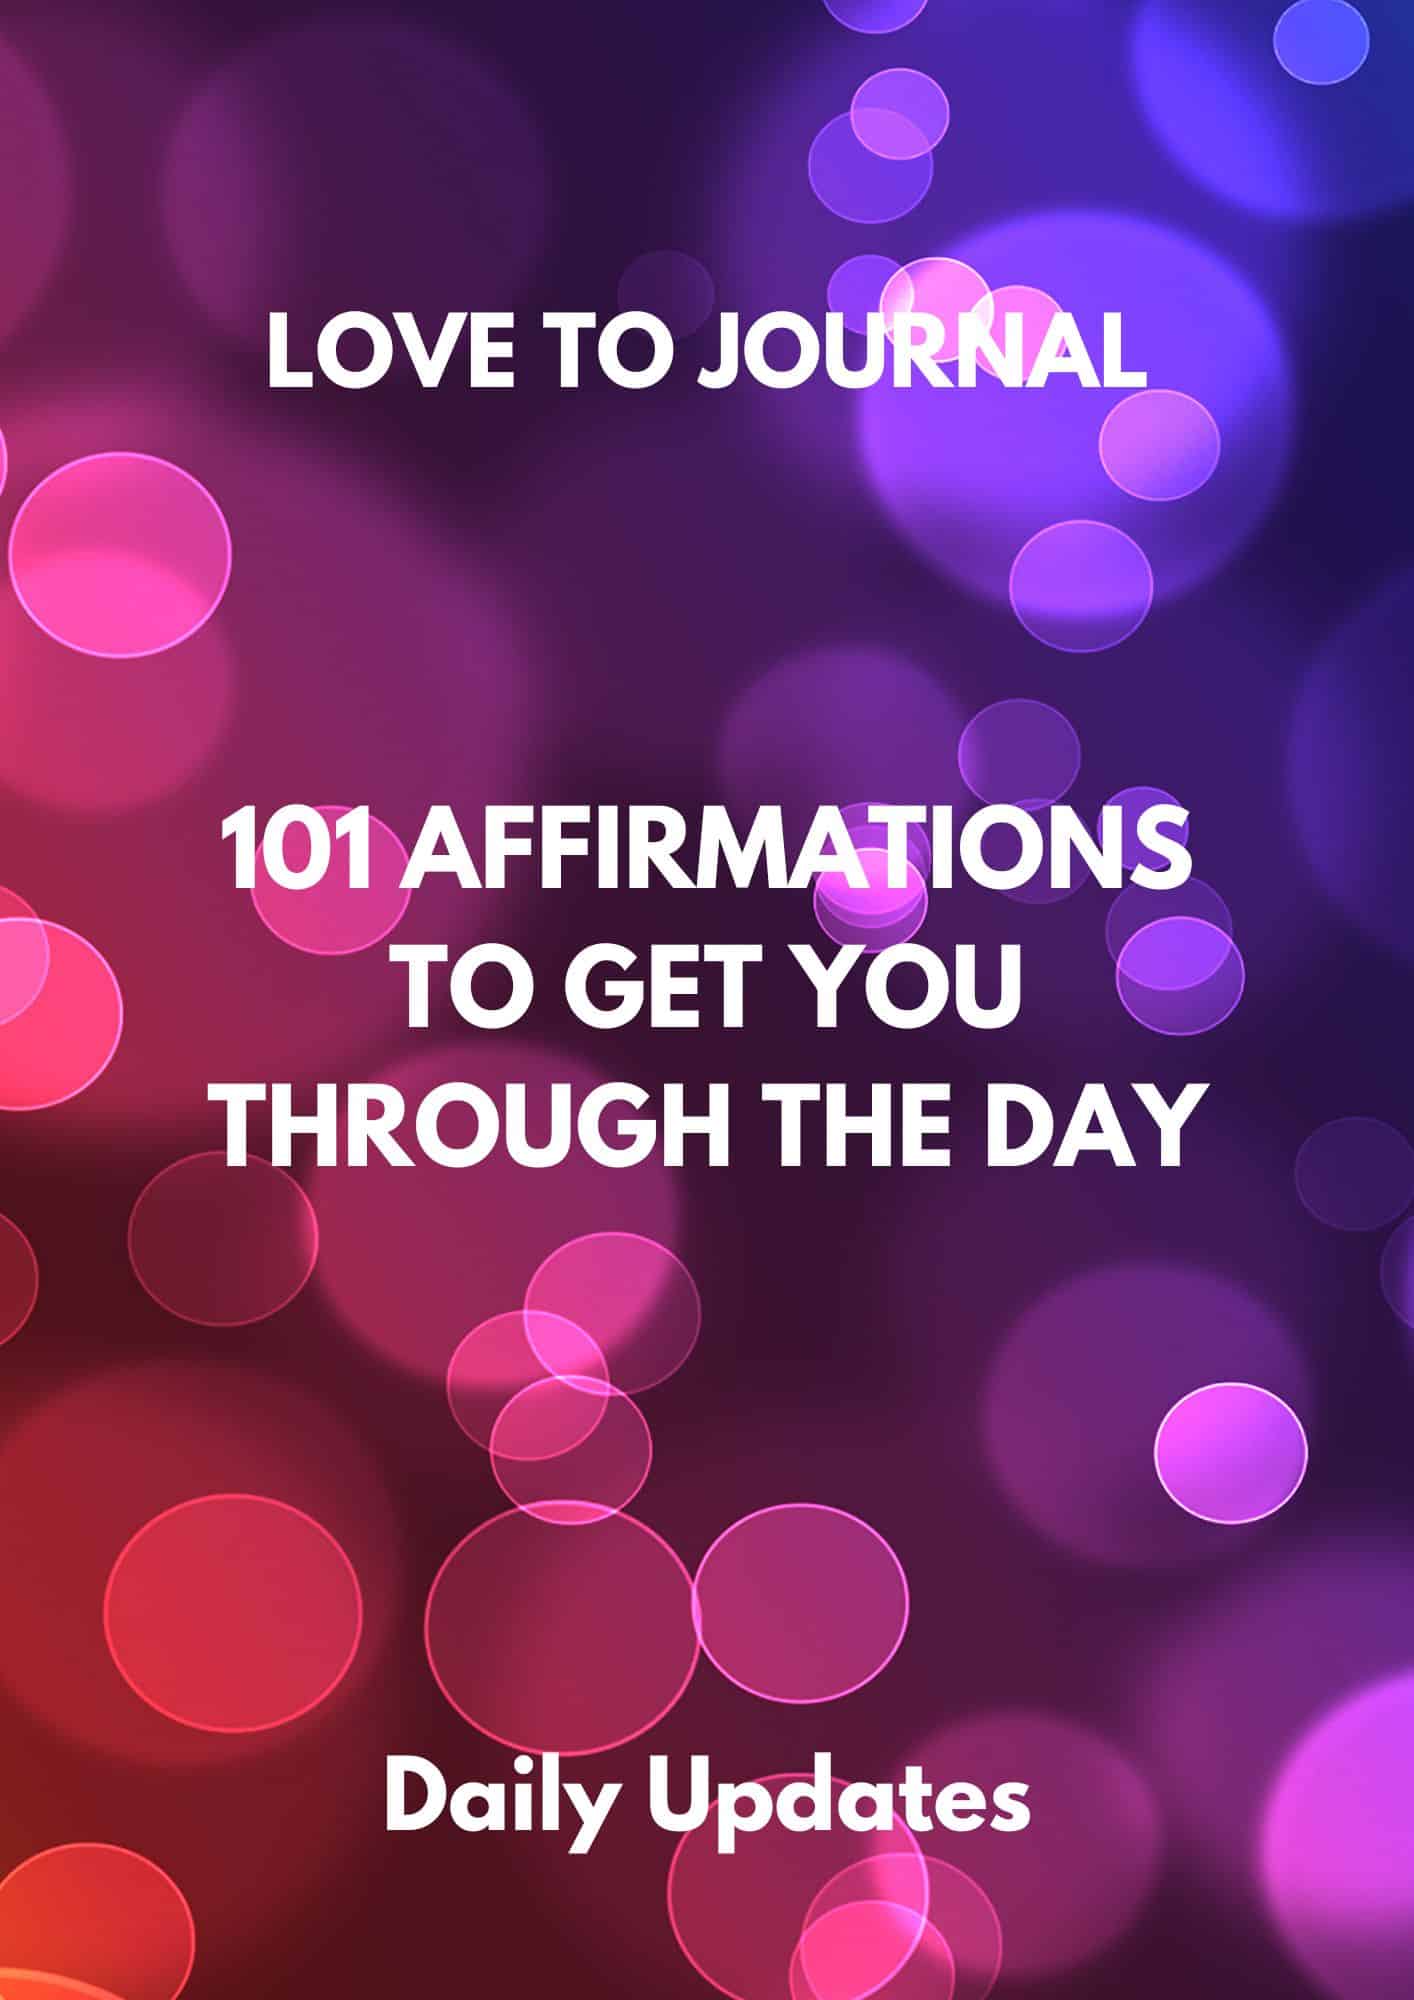 daily updates - affirmations